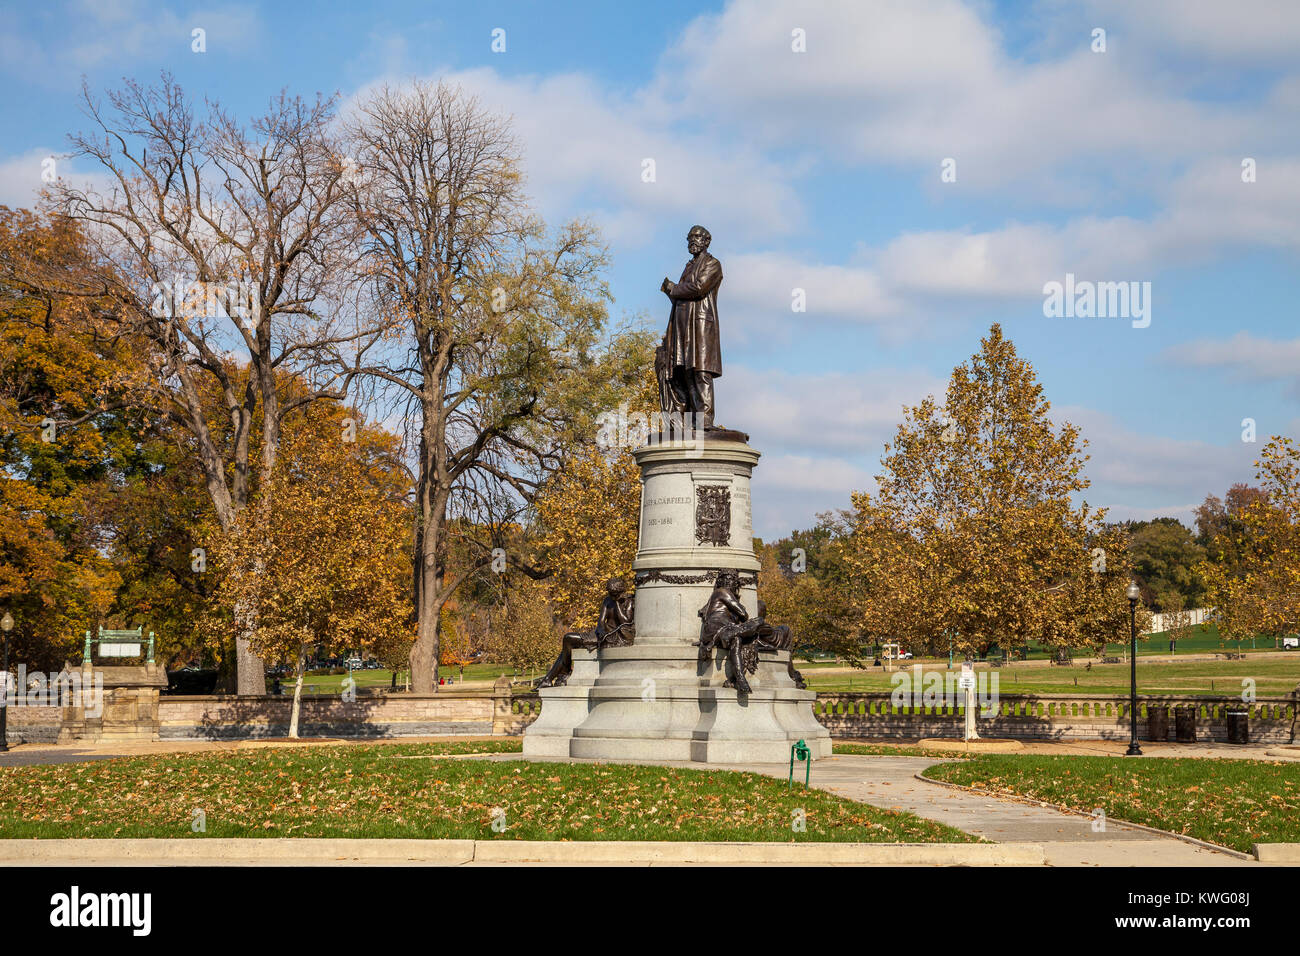 The sculpture monument of President James A. Garfield in front of the Capitol Hill building, Washington DC, USA Stock Photo